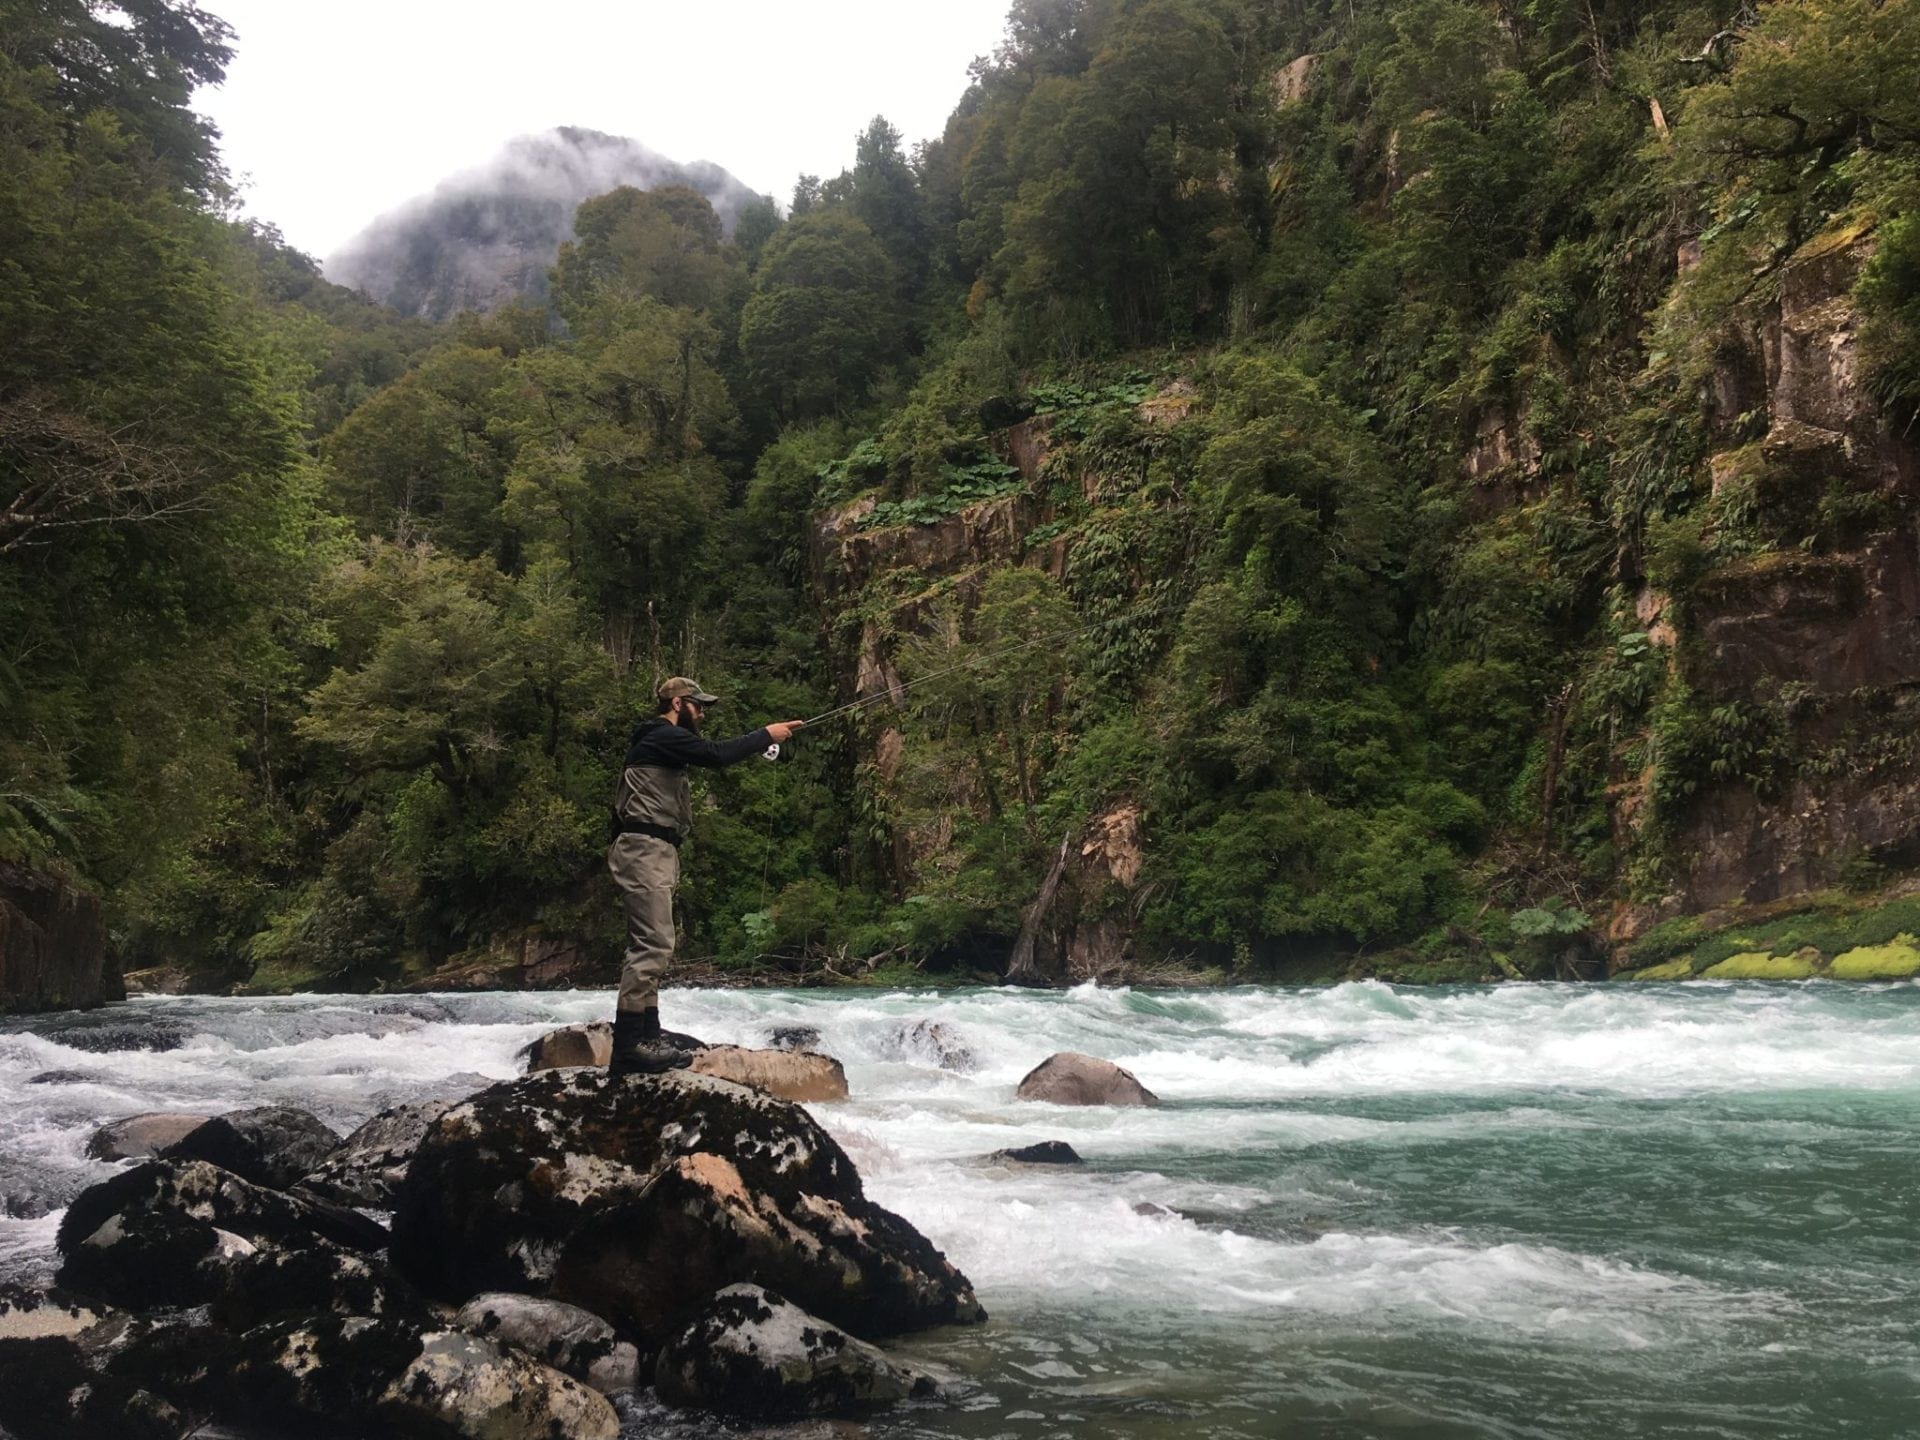 Patagonia Fly Fishing Adventure Report [Part II]